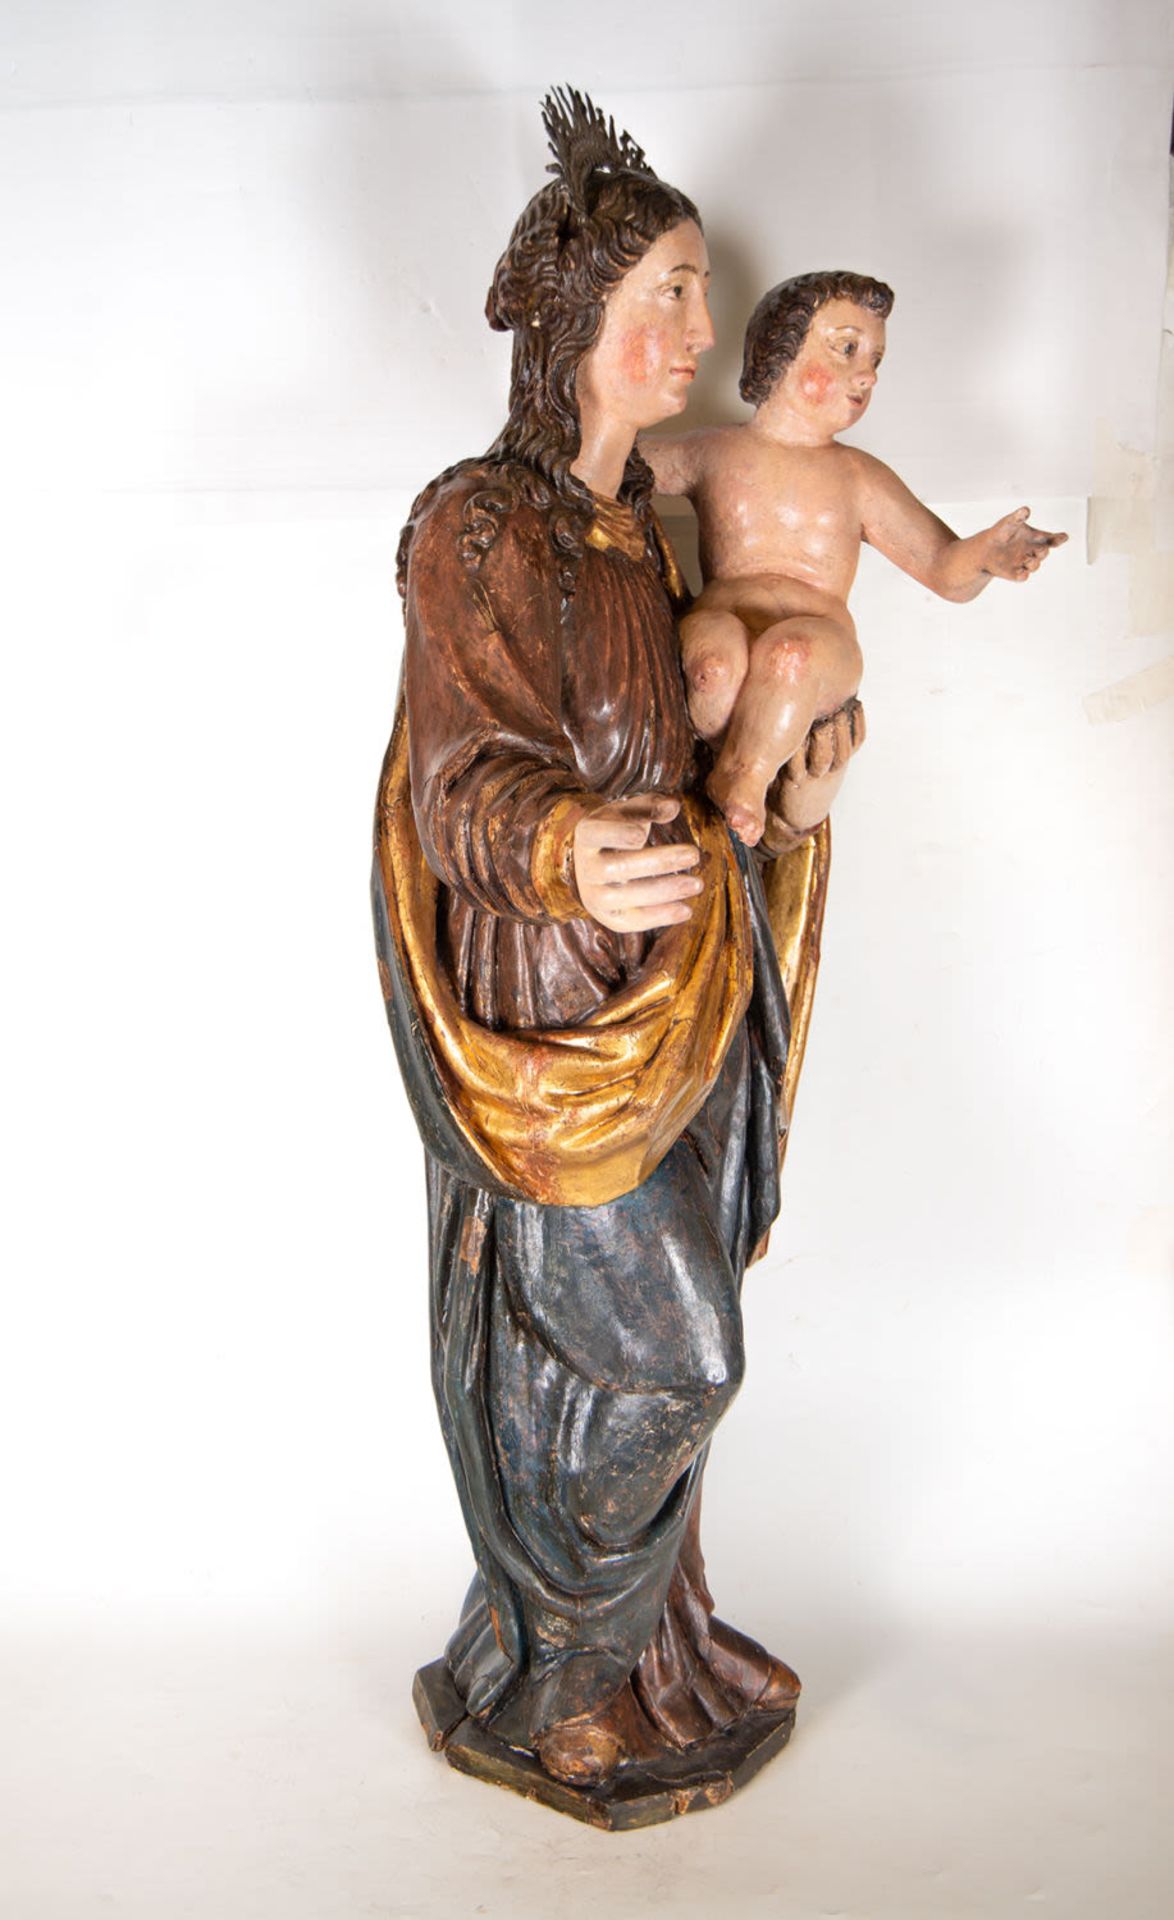 Large Virgin with Child in Arms, Portuguese school of the XVI - XVII century - Image 6 of 13